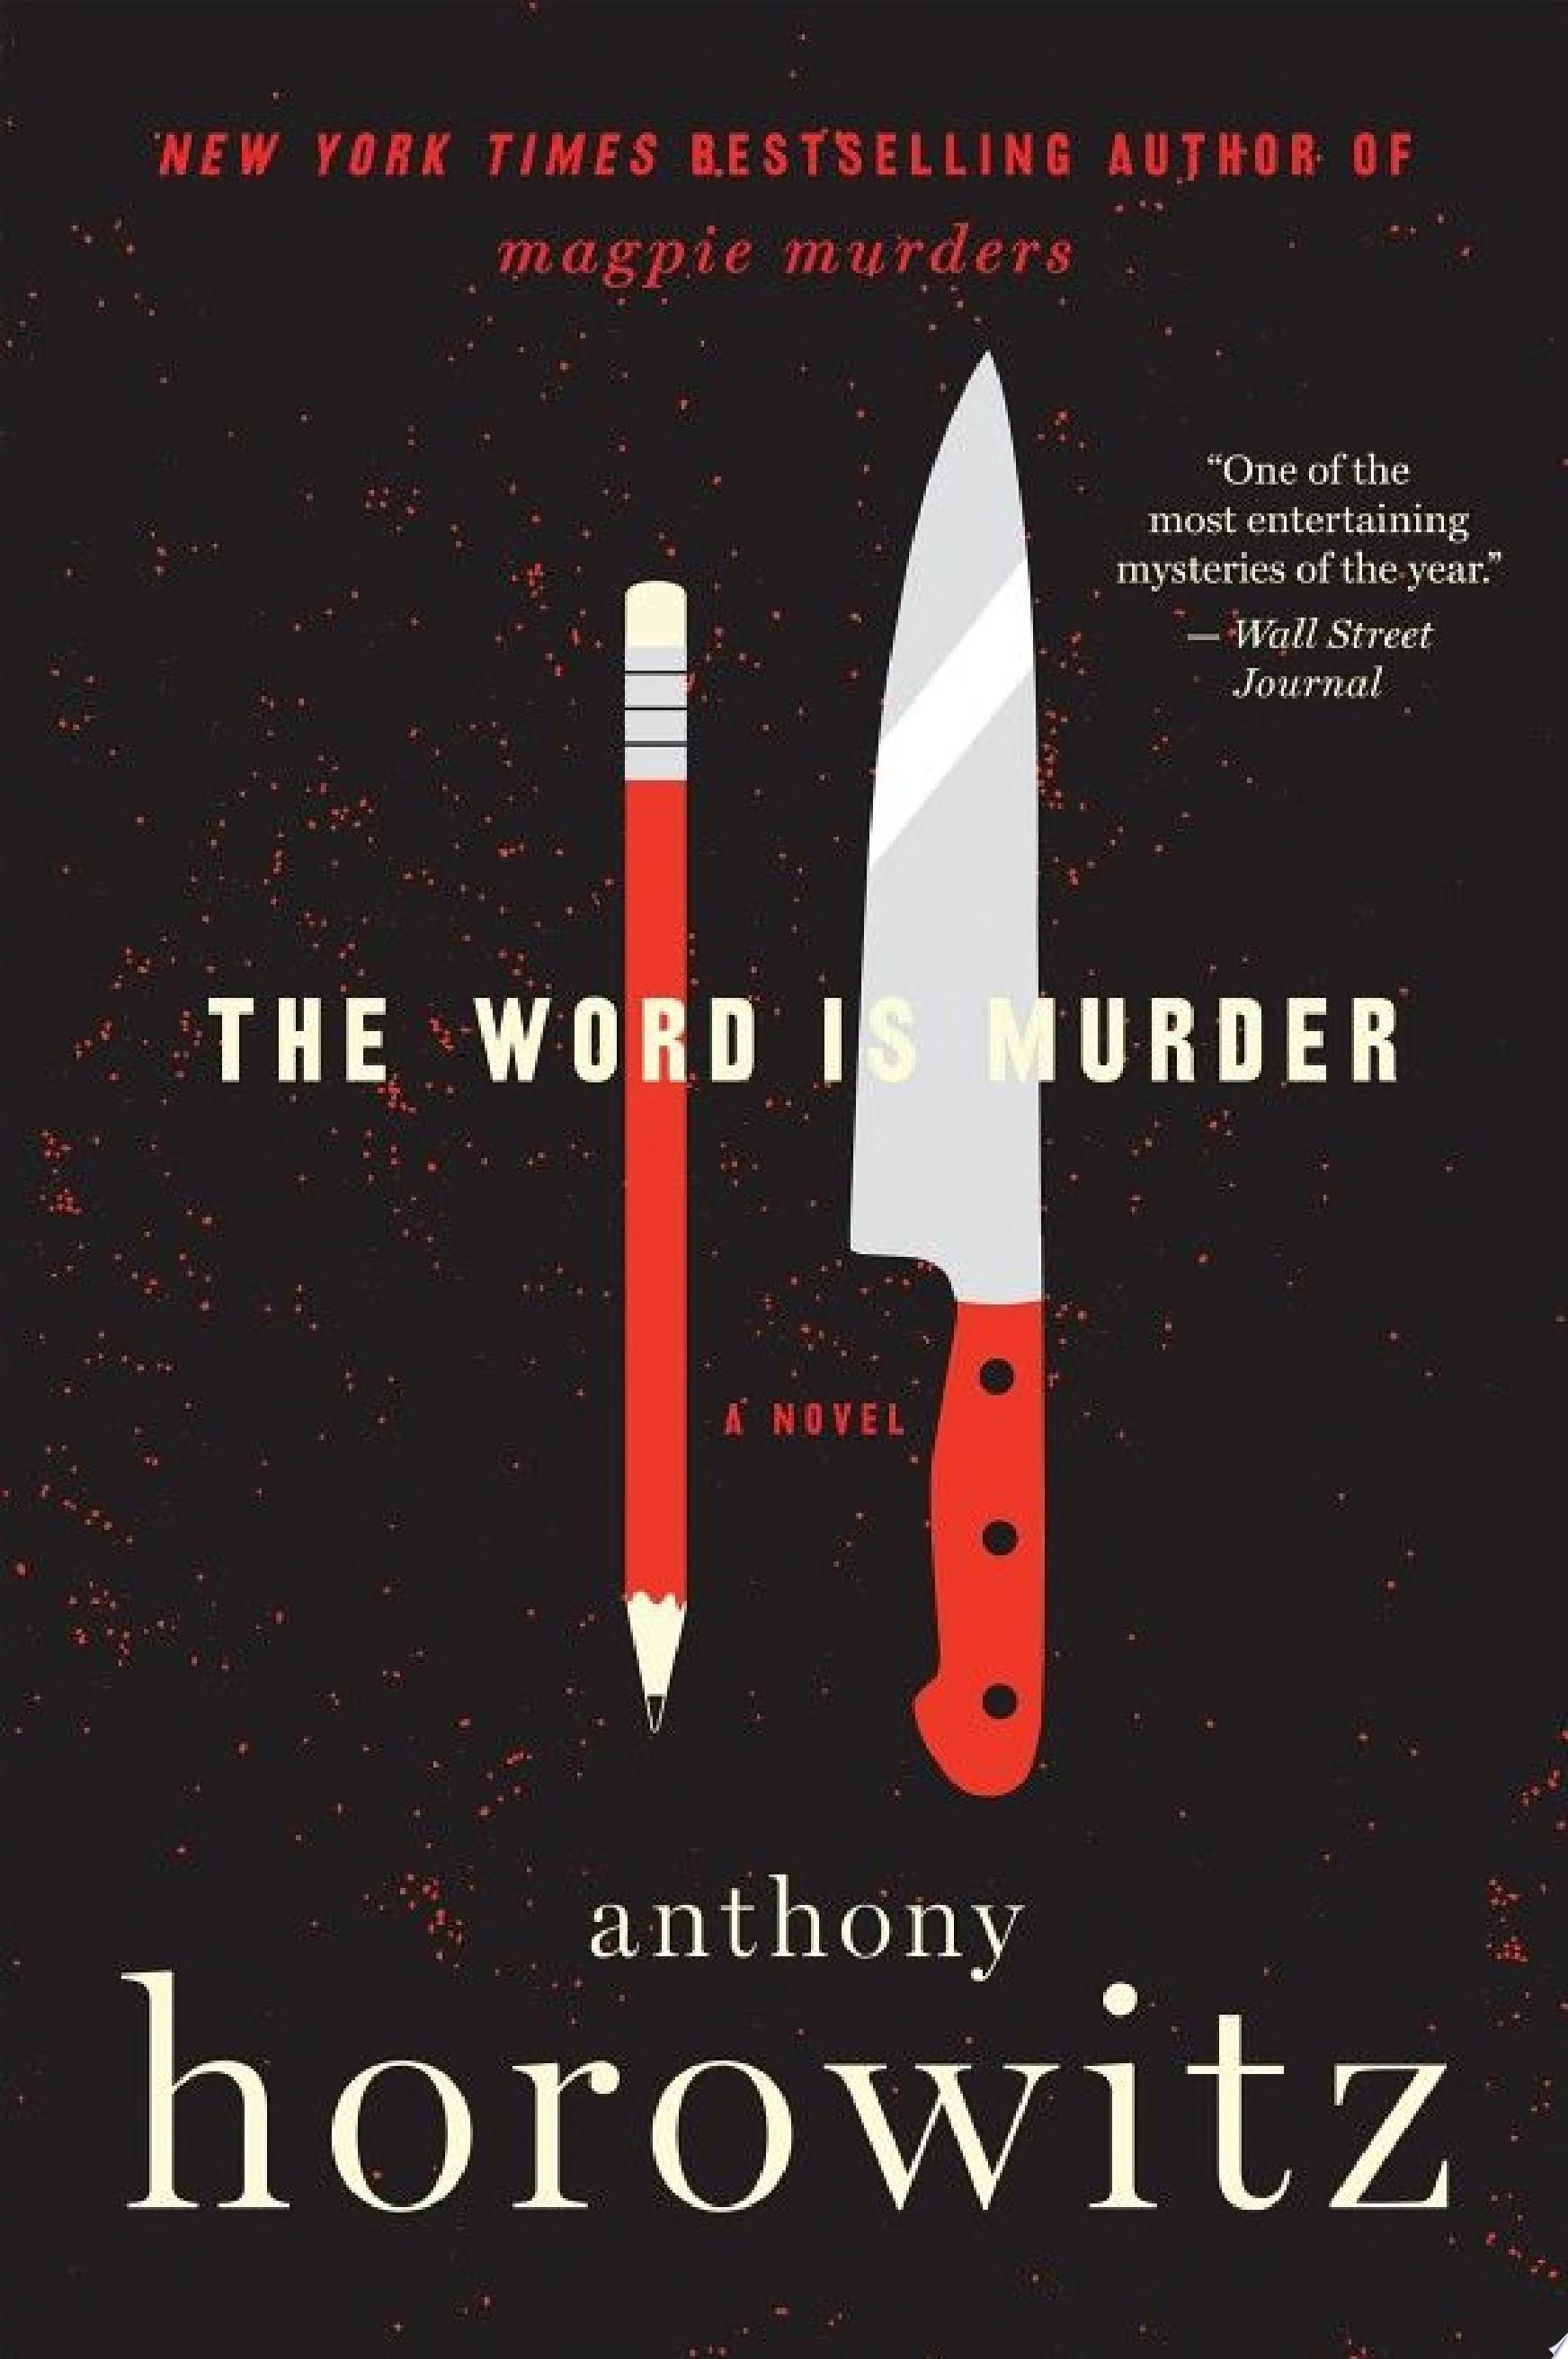 Image for "The Word Is Murder"